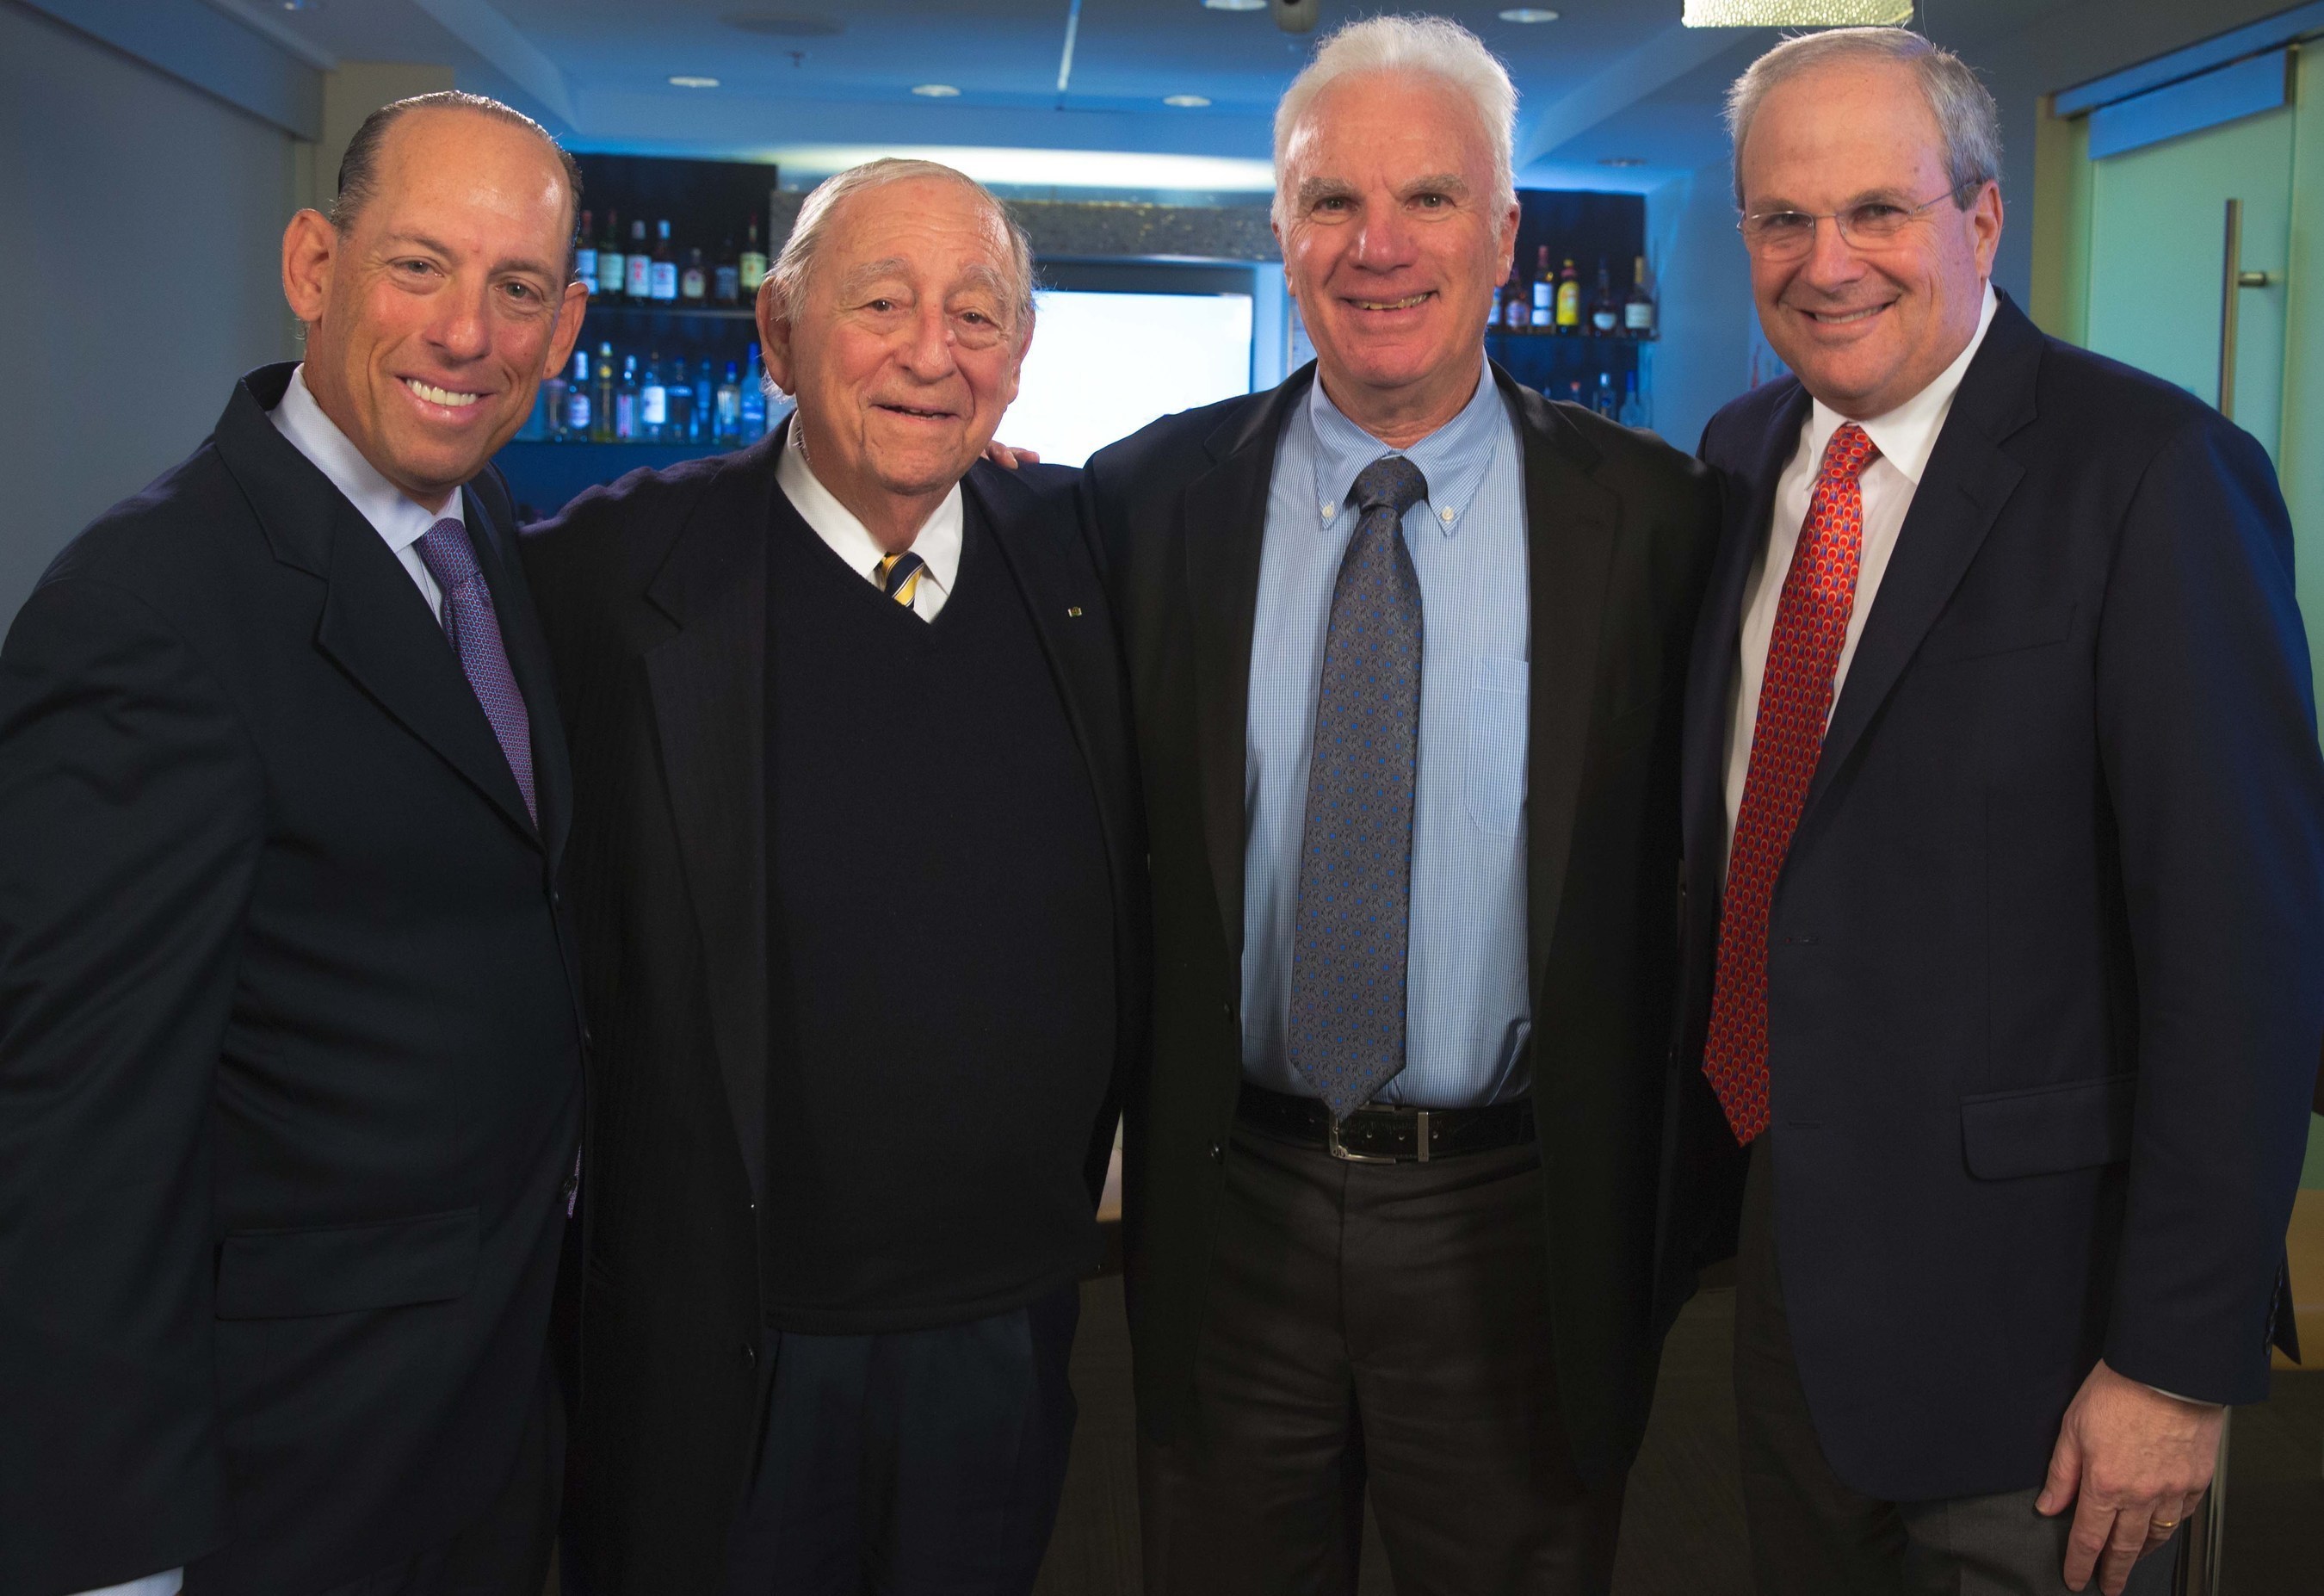 Executive leadership team members for Southern and Glazer's (from left to right): Wayne E. Chaplin, President and Chief Executive Officer of Southern; Harvey R. Chaplin, Chairman of Southern; Bennett Glazer, Chairman of Glazer's; and Sheldon ("Shelly") Stein, President and Chief Executive Officer of Glazer's.